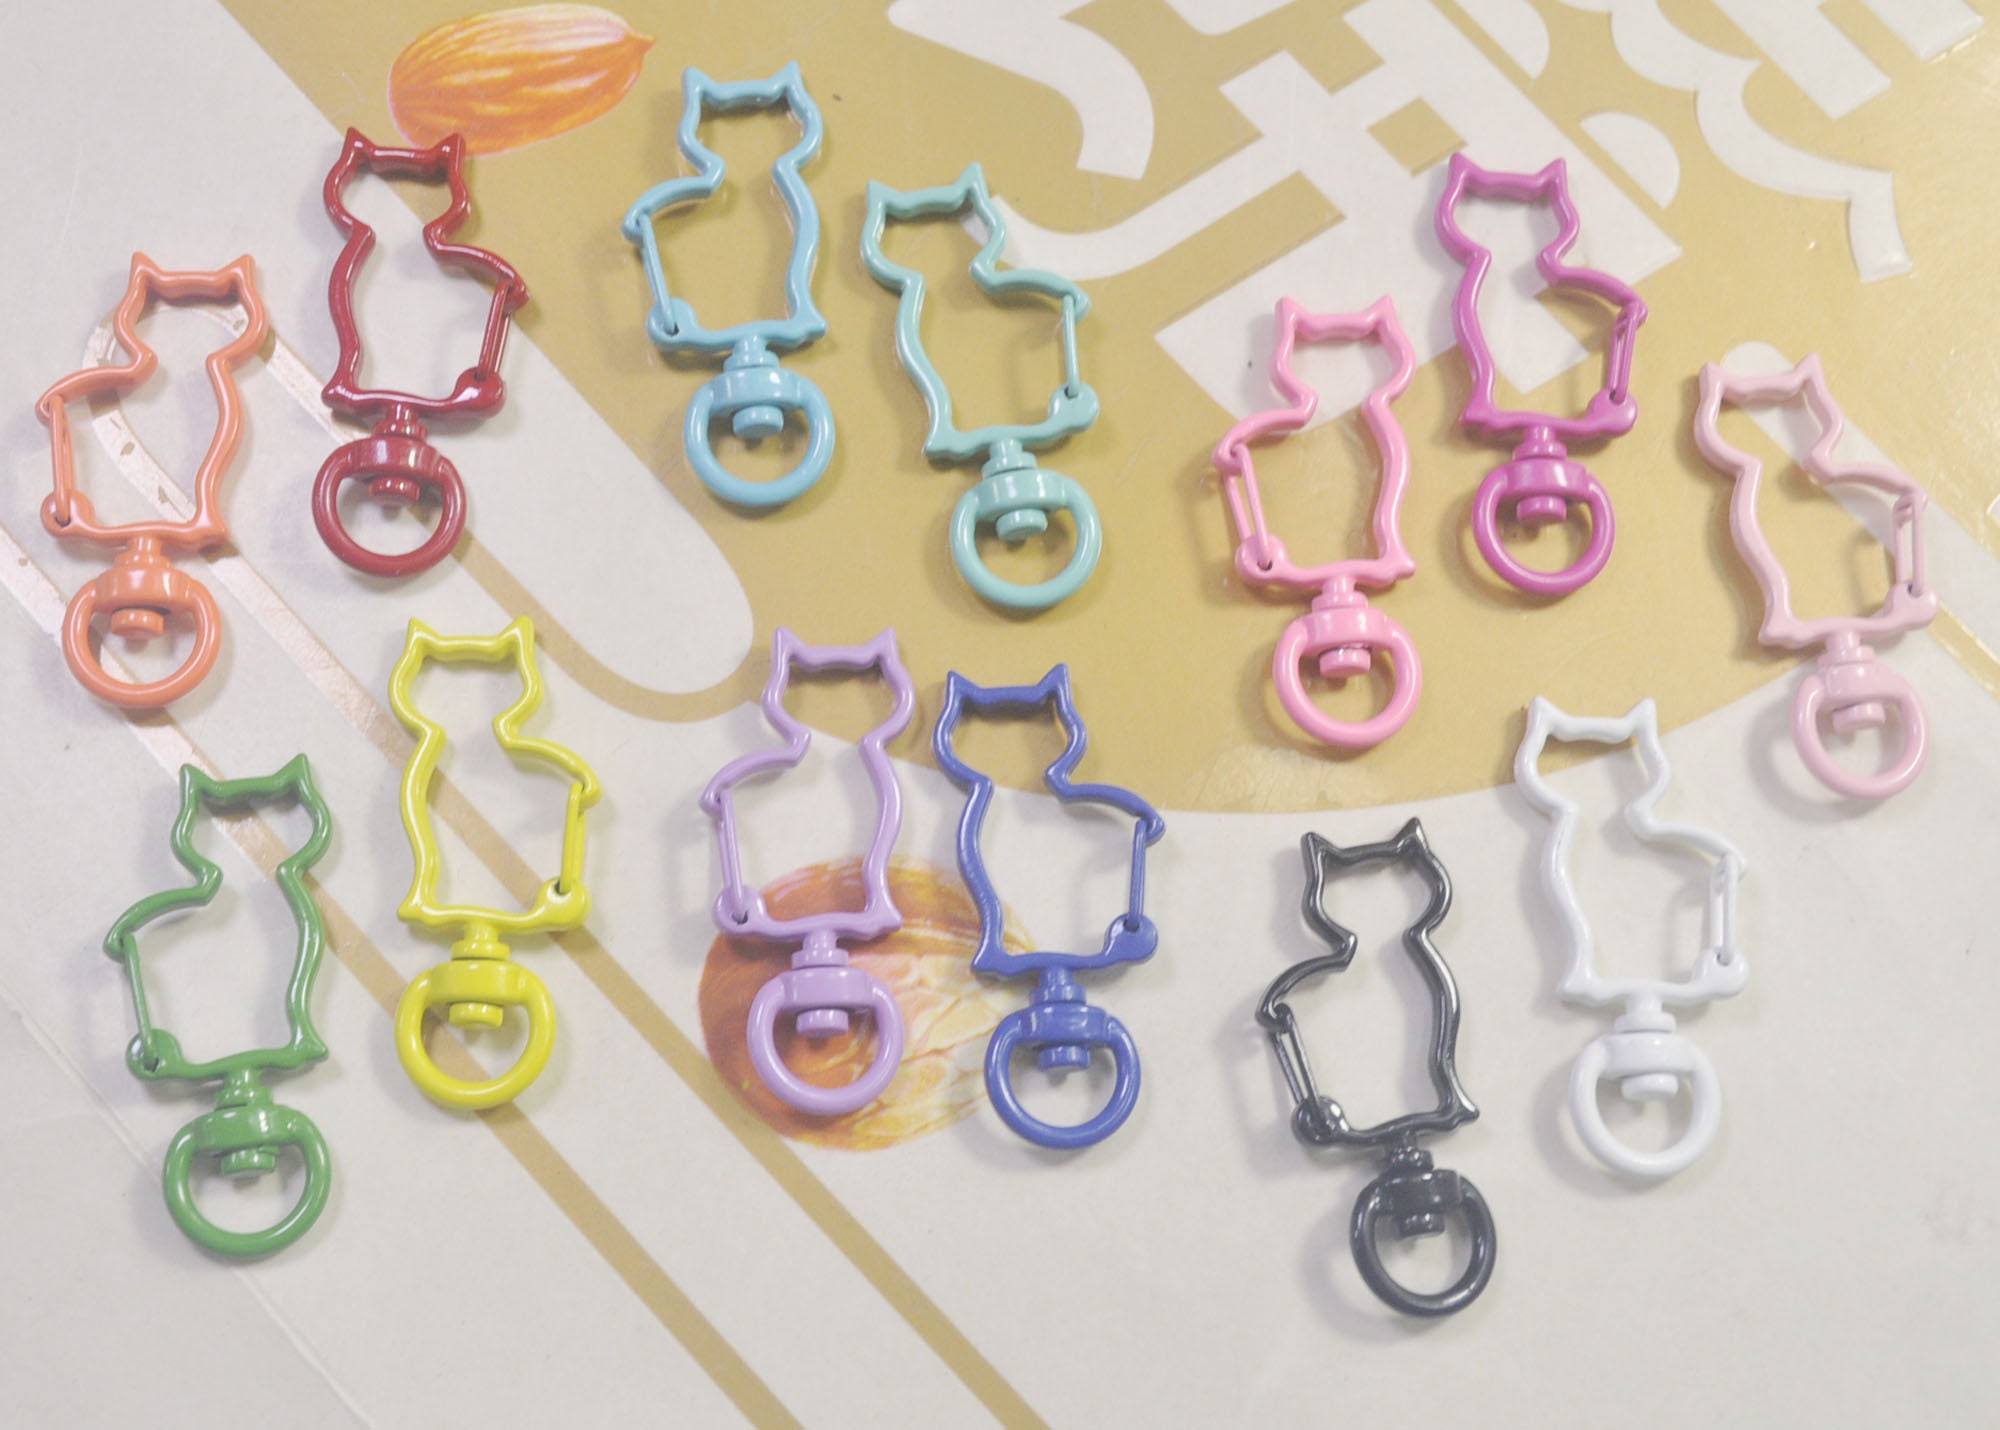  Hoement 20 Sets Dog Button Lobster Clasp Keychain Key